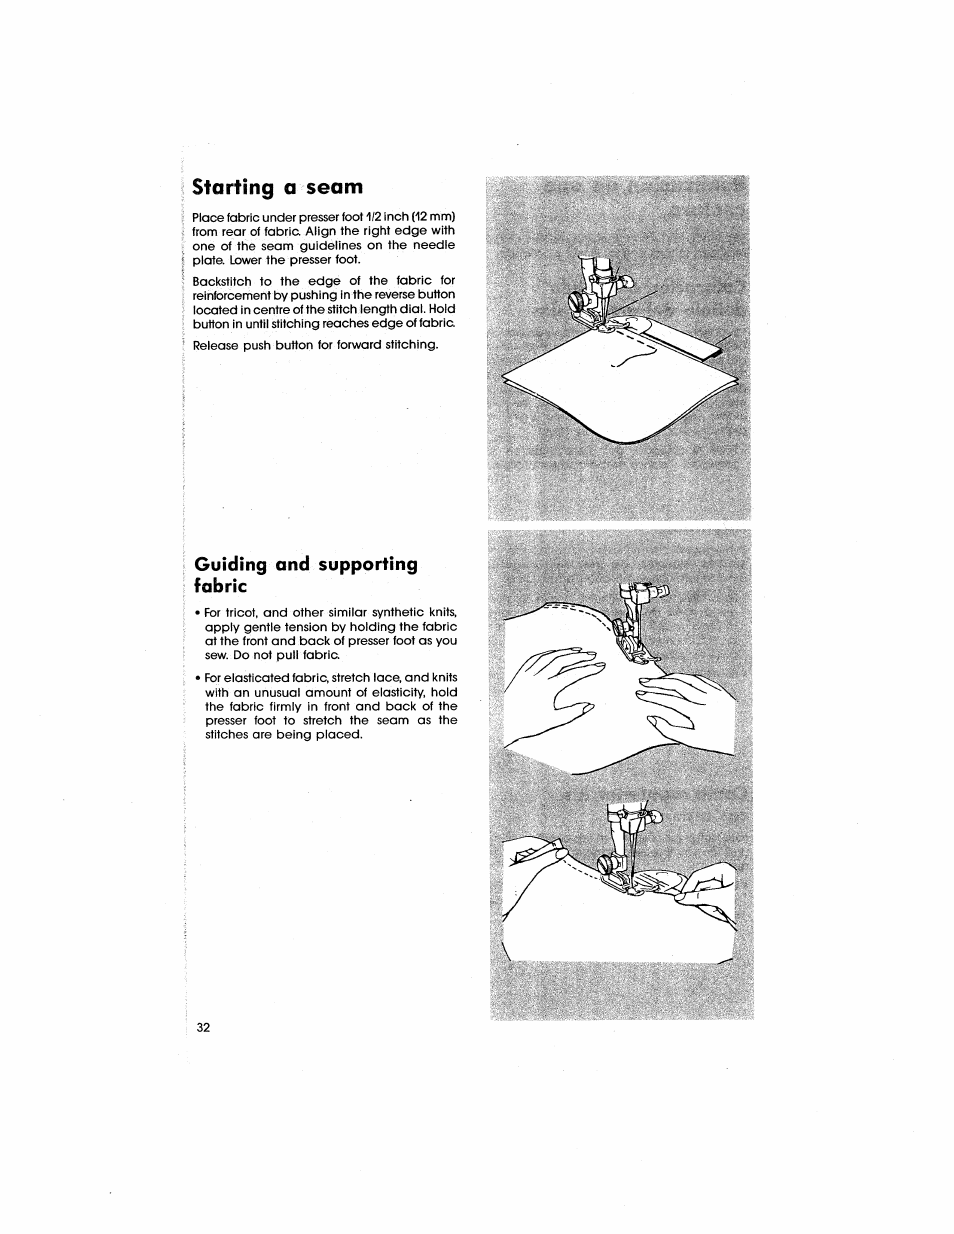 Starting a seam, Guiding and supporting fabric | SINGER 5805 User Manual | Page 34 / 88